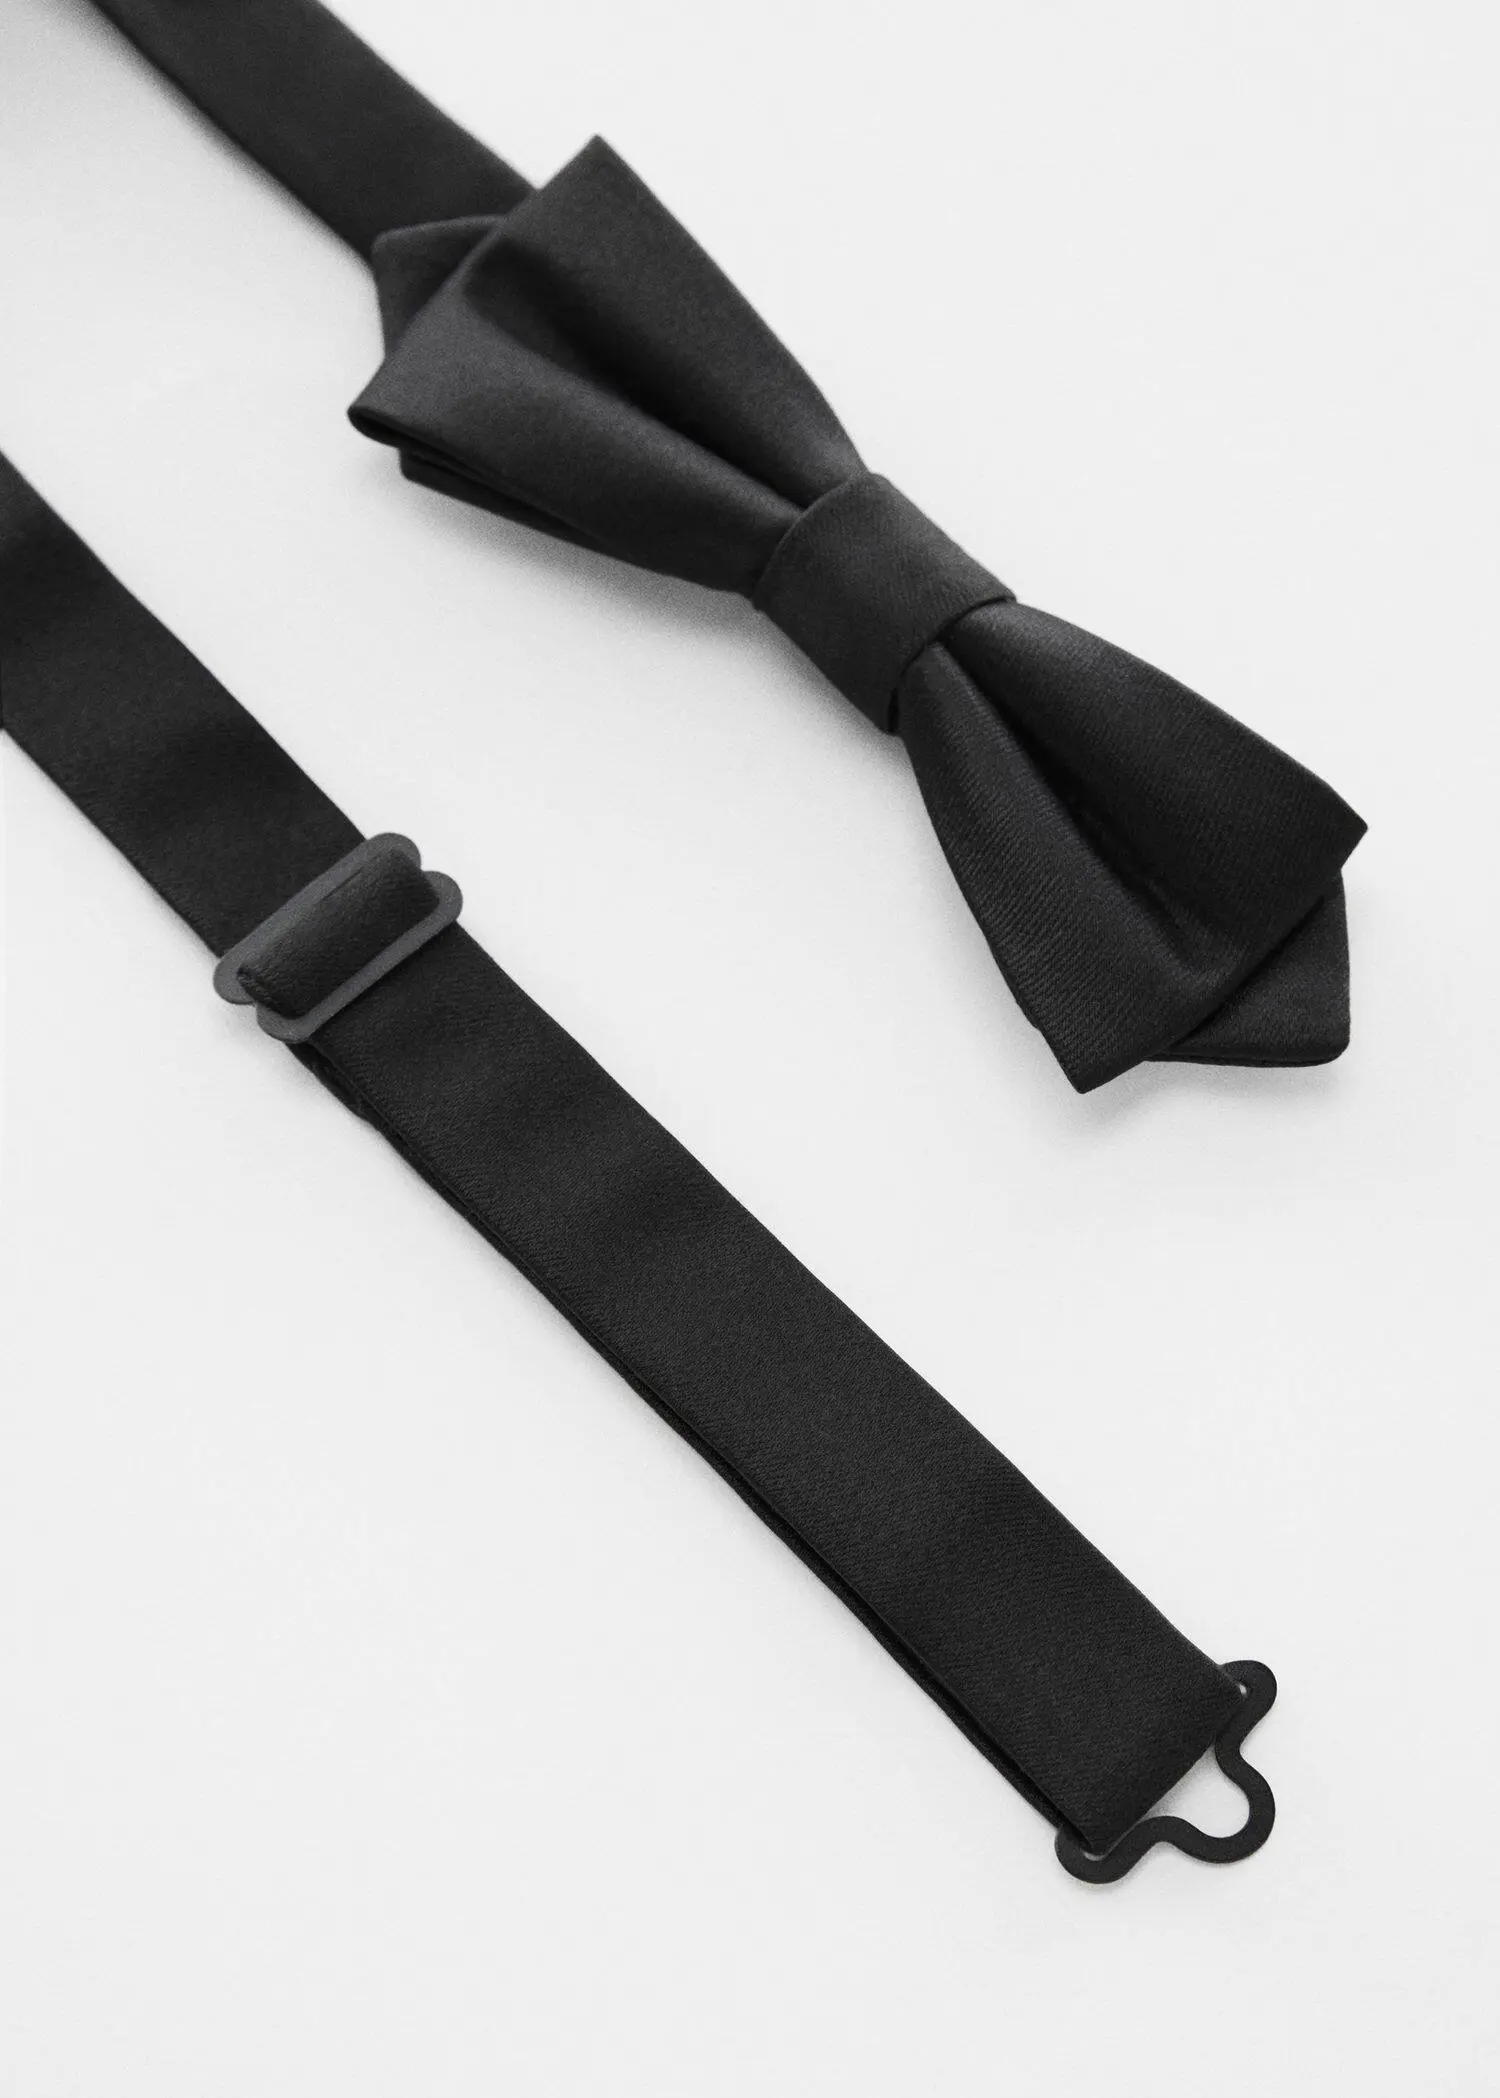 Mango Classic bow tie . a pair of black bow ties sitting next to each other. 